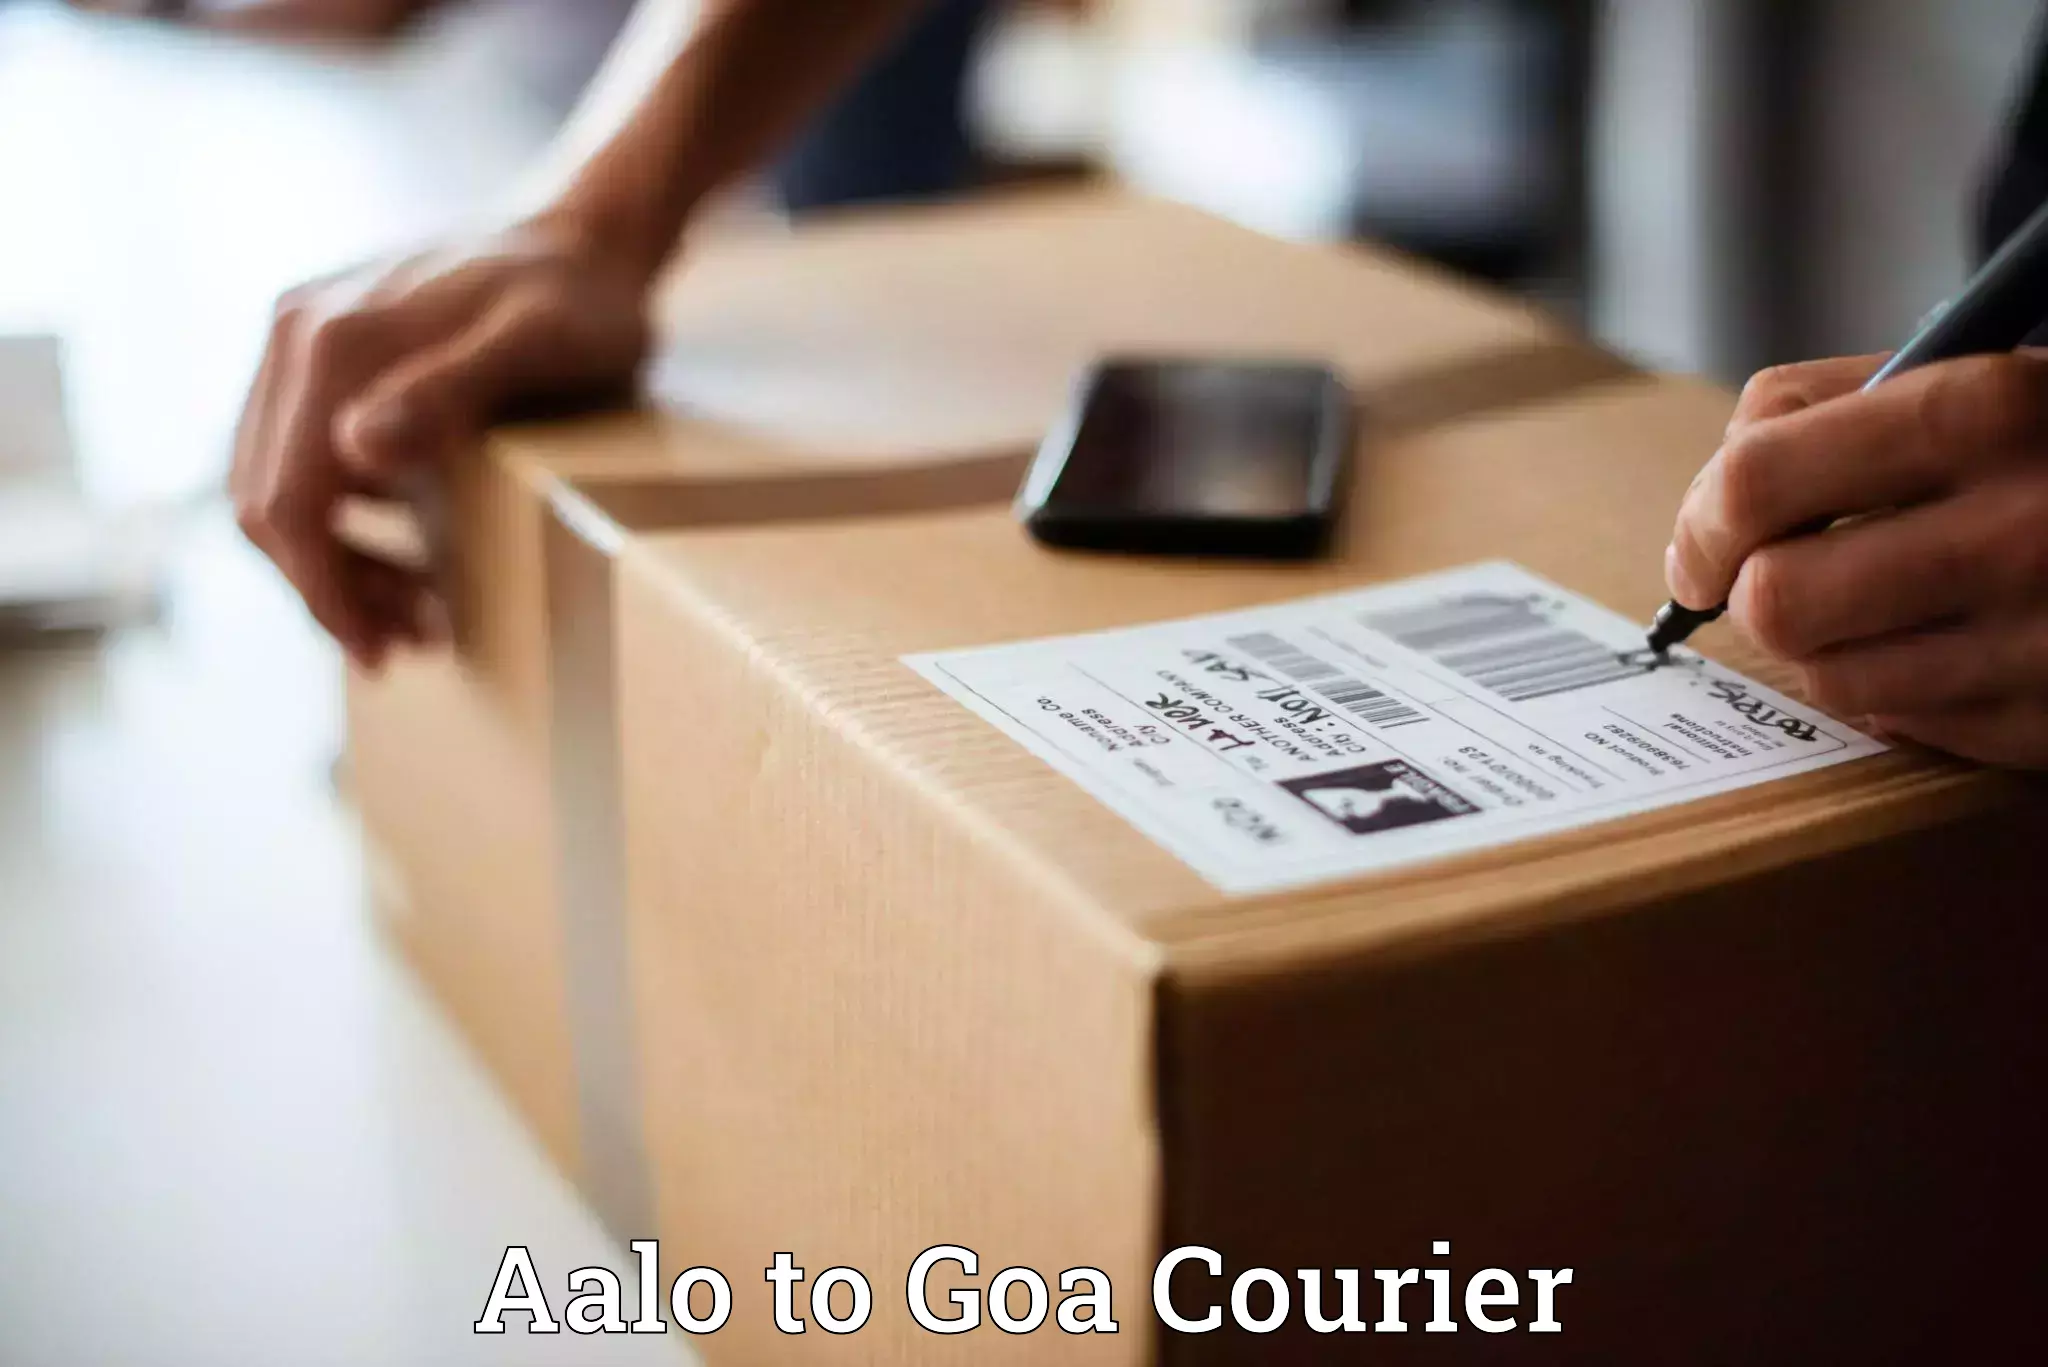 User-friendly delivery service Aalo to Goa